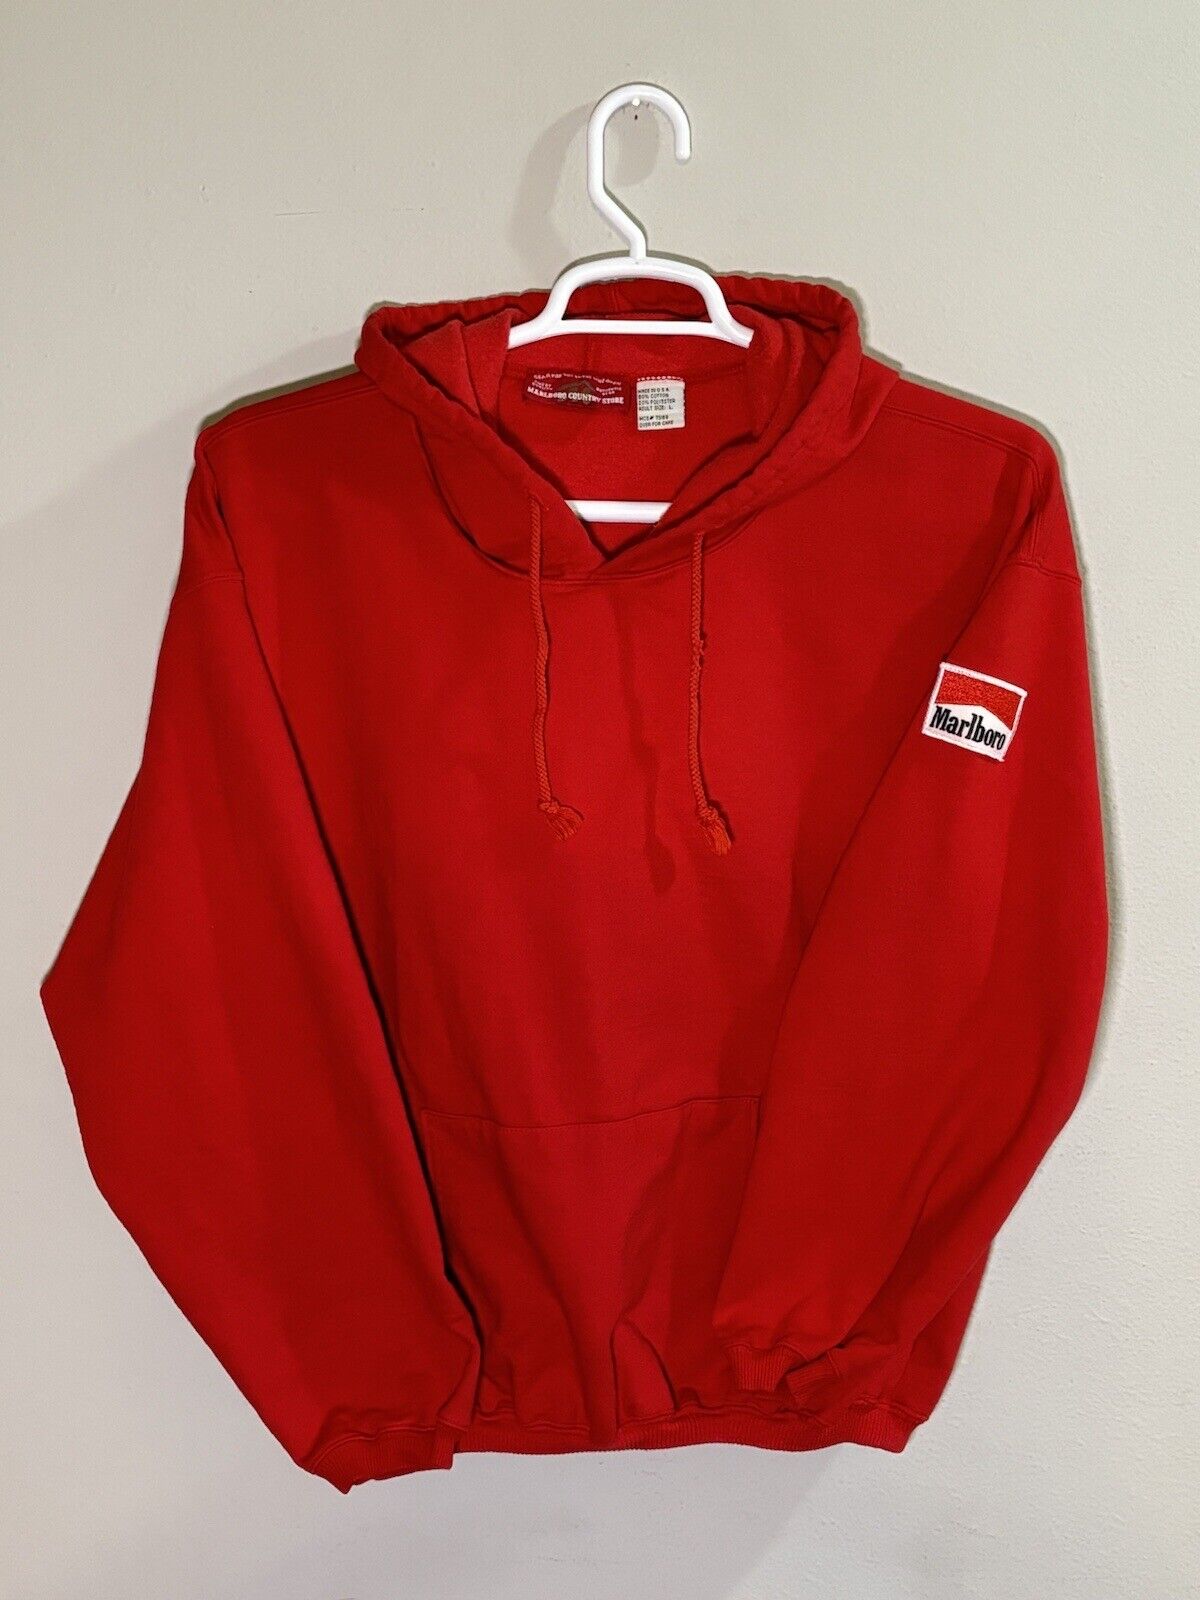 VTG 90s Marlboro Country Store Sweatshirt Hoodie Mens Large Red Cigarette Patch